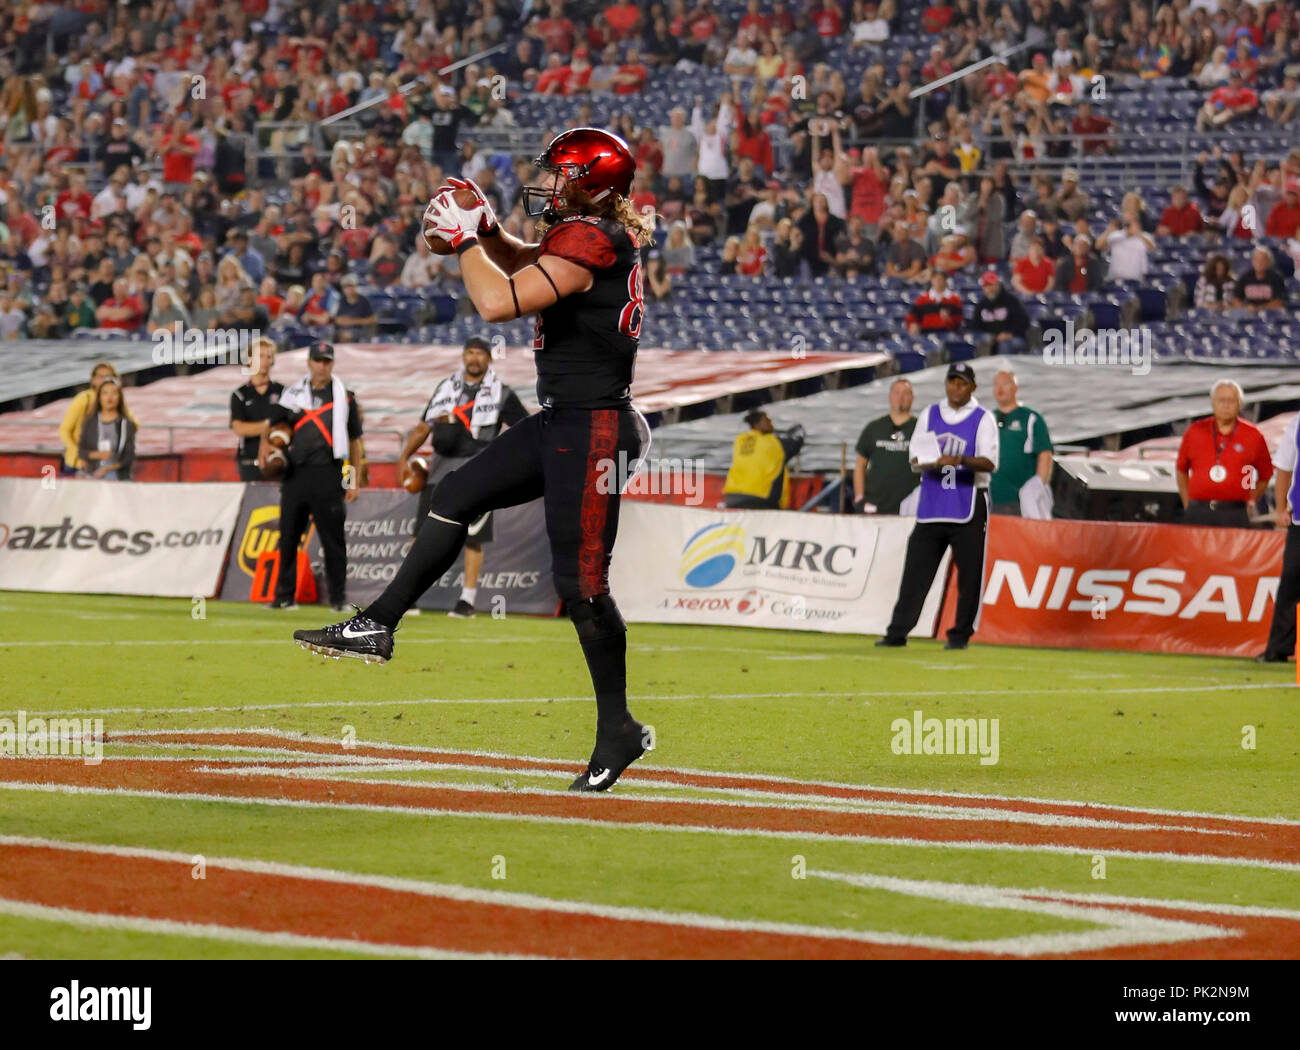 San Diego, California, USA. 8th Sep, 2018. San Diego State Aztecs tight end Parker Houston (82) completes the pass for the 2-point conversion against the Sacramento State Hornets at SDCCU Stadium in San Diego, California. Michael Cazares/Cal Sport Media. Credit: csm/Alamy Live News Stock Photo